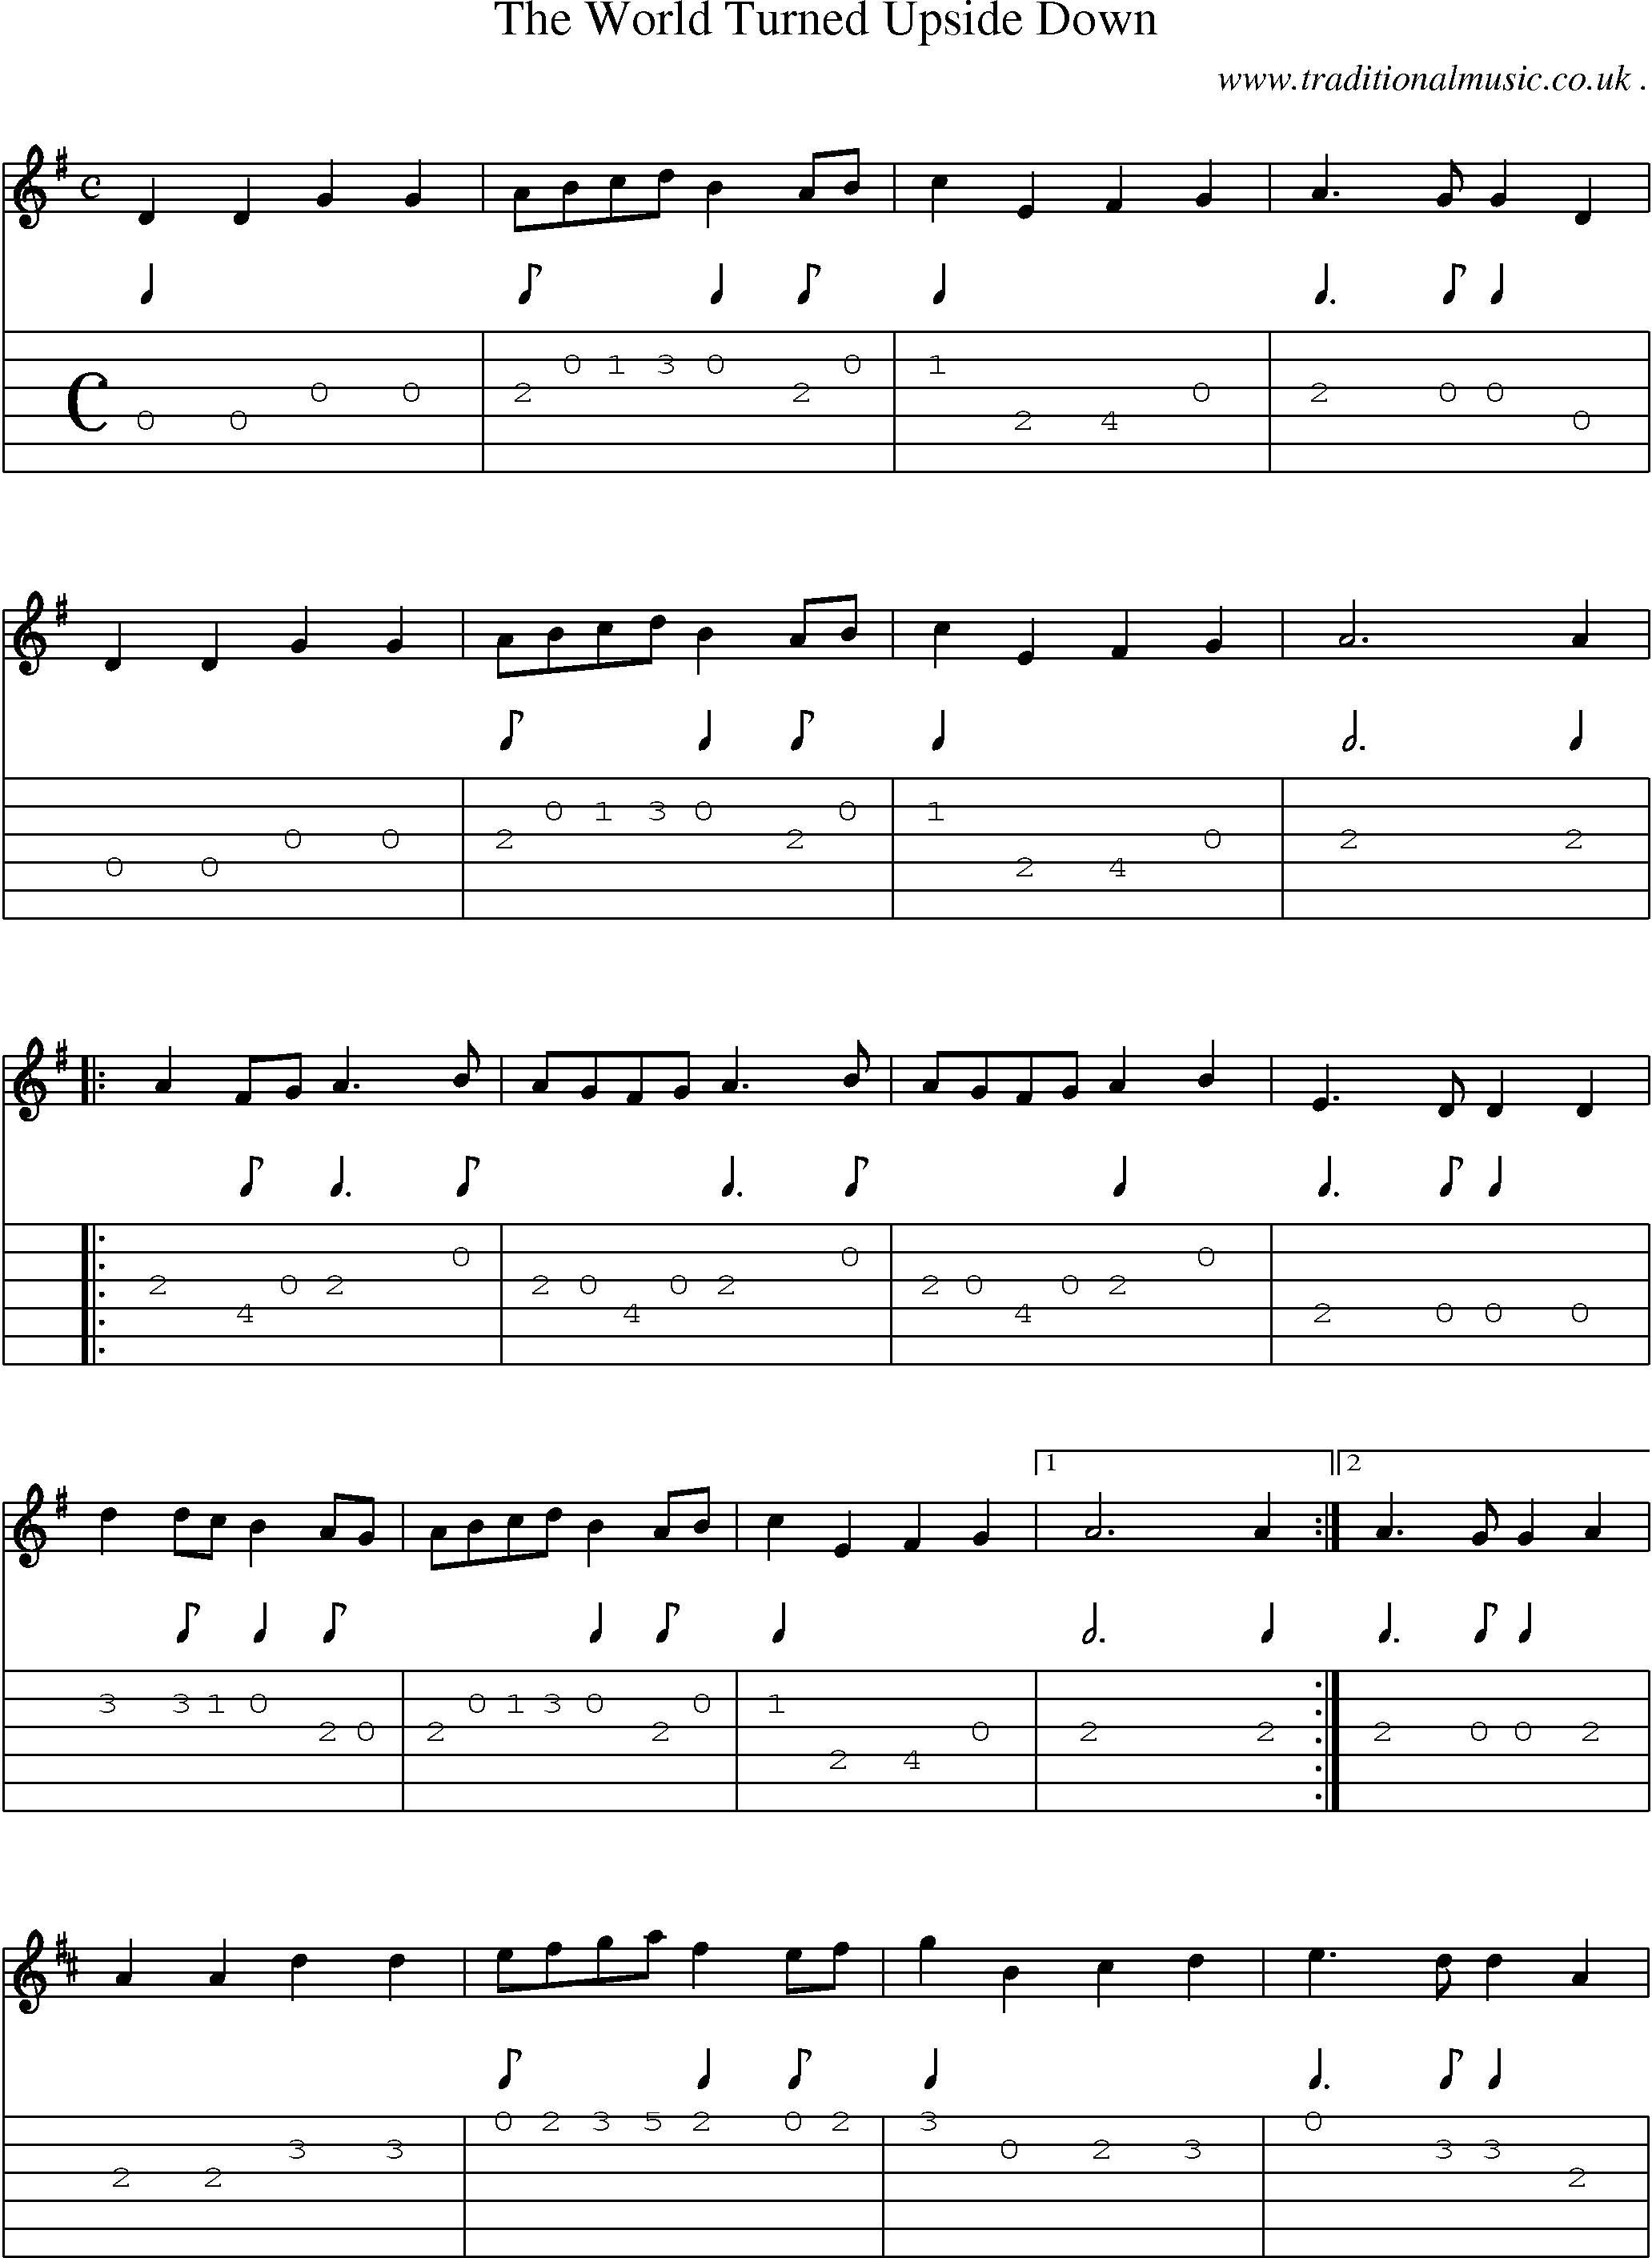 Sheet-Music and Guitar Tabs for The World Turned Upside Down